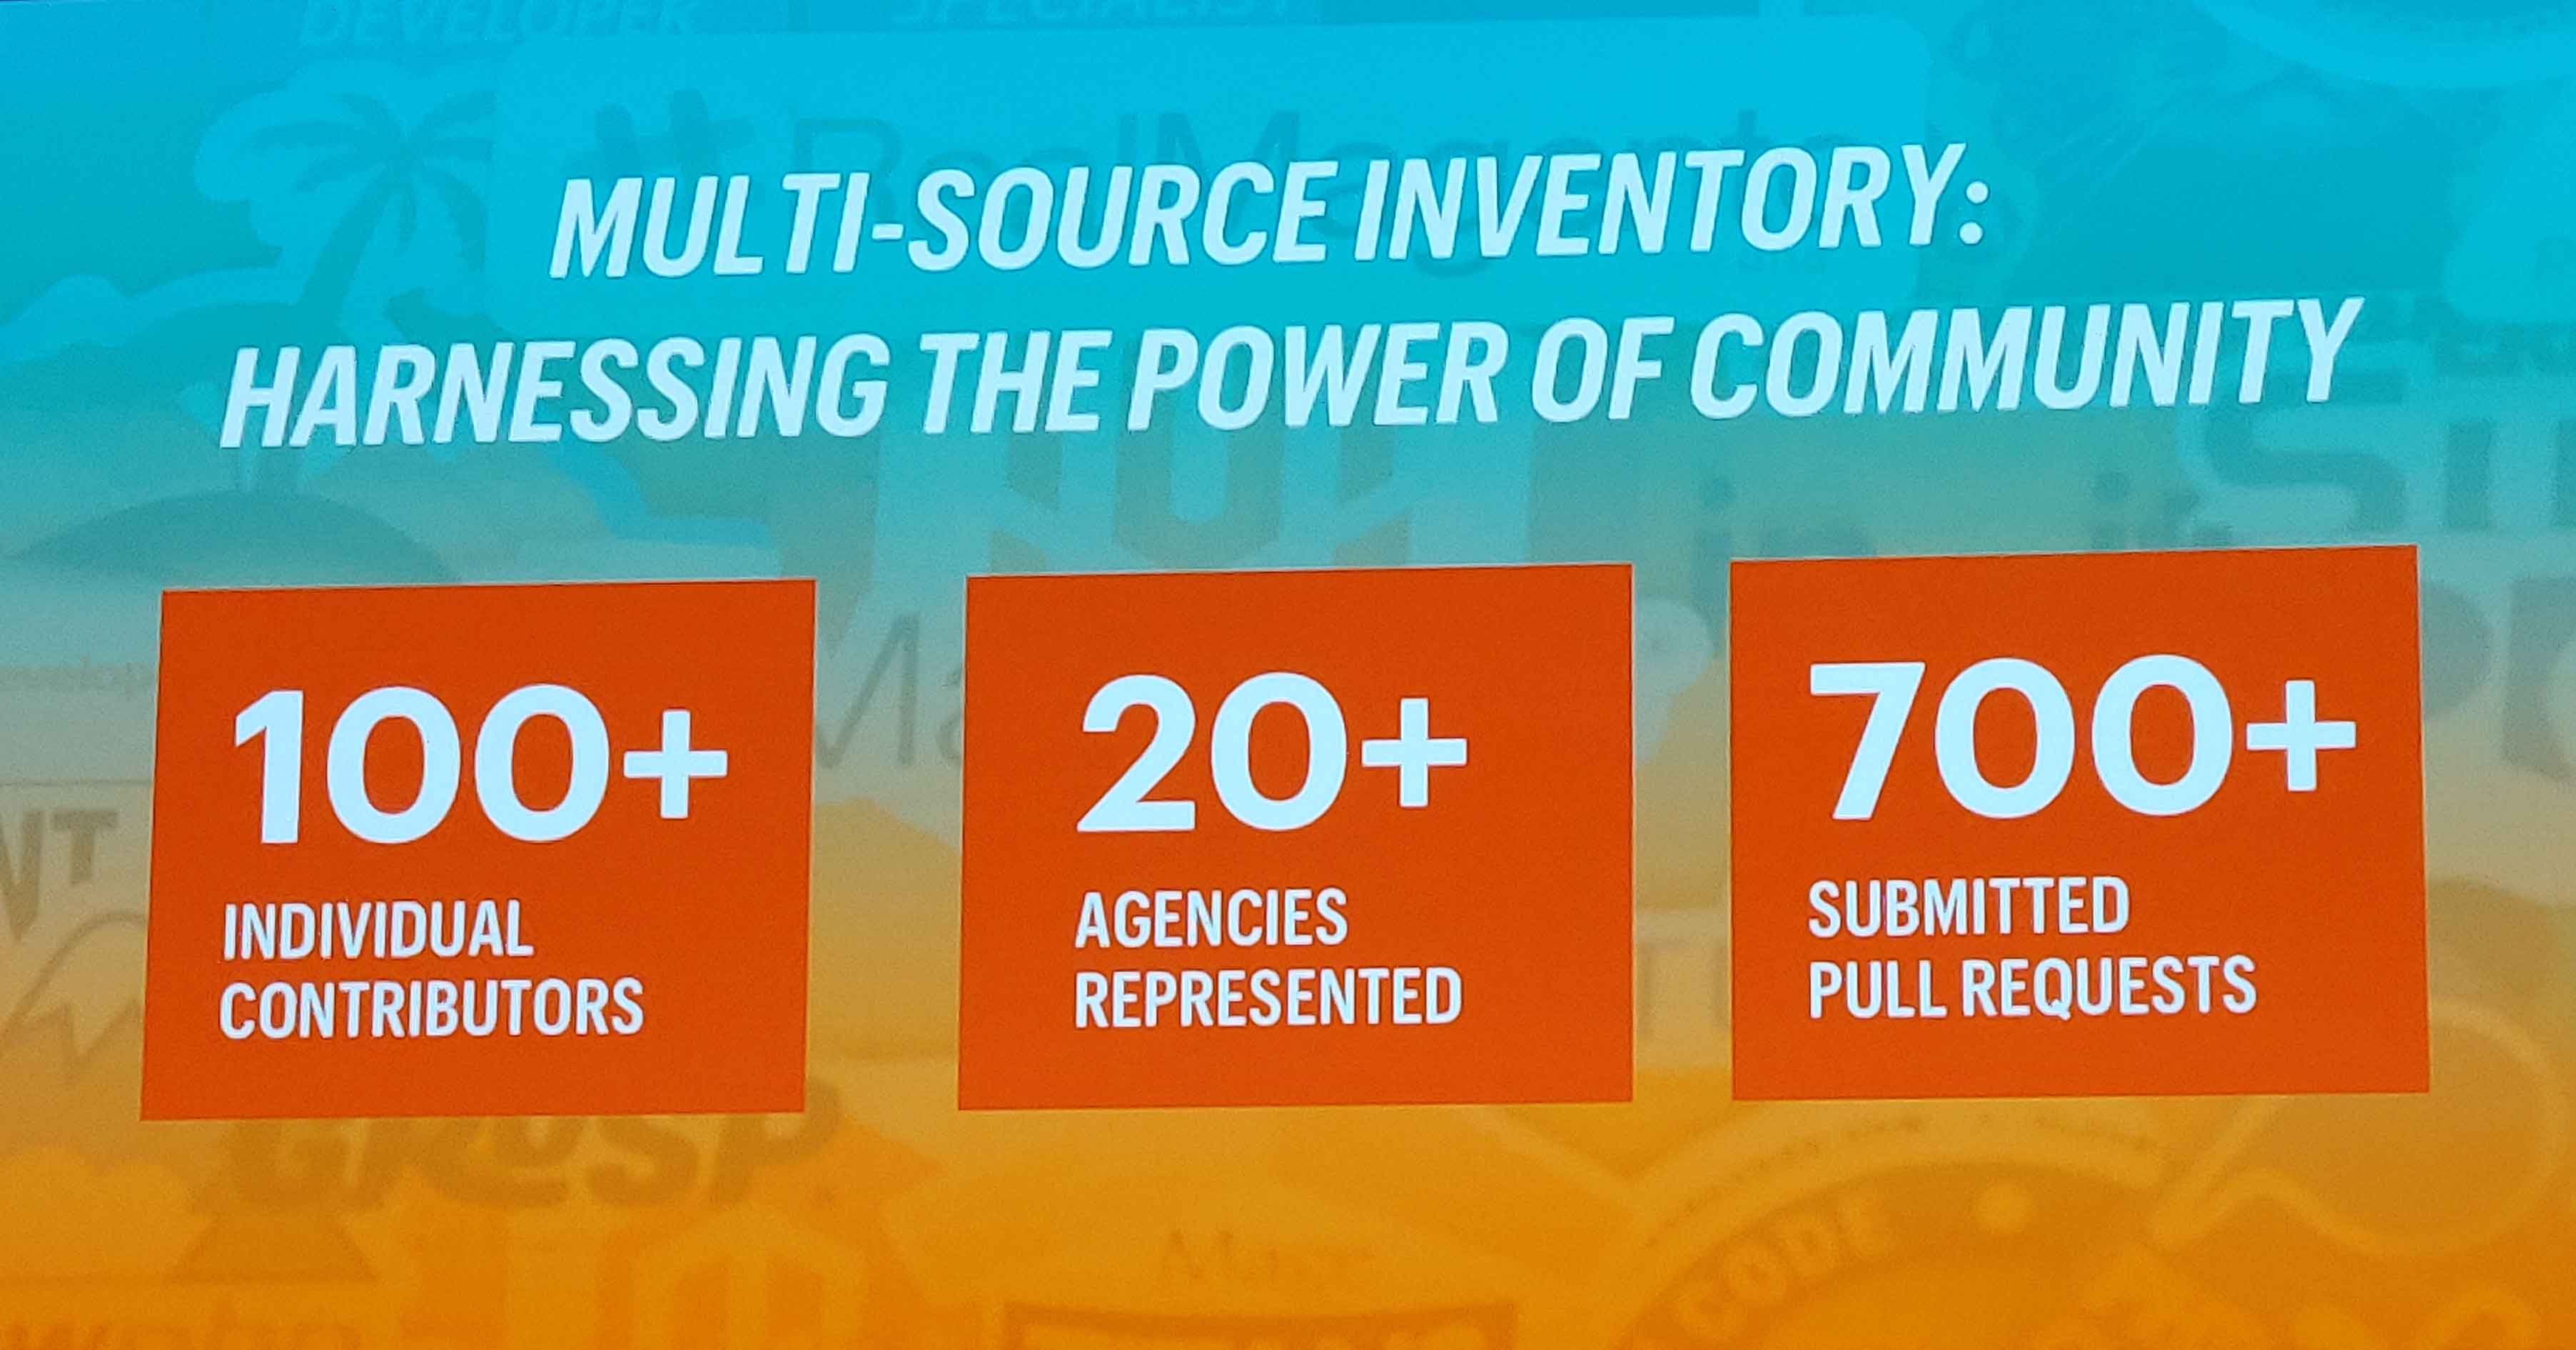 Harnessing the power of the multi-source inventory